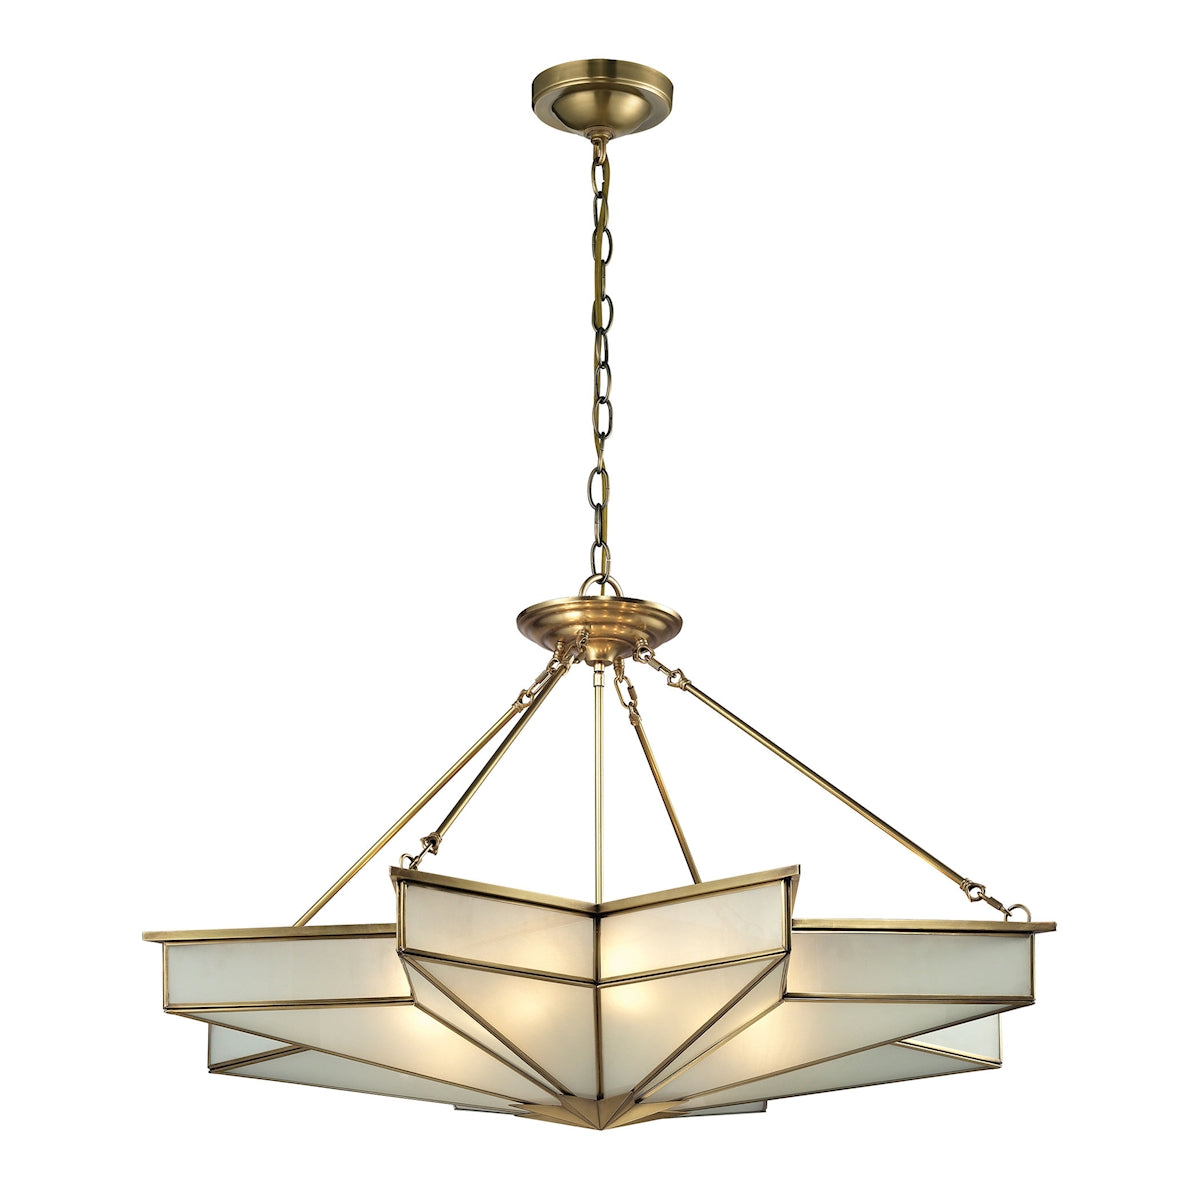 ELK Lighting 22013/8 Decostar 8-Light Chandelier in Brushed Brass with Frosted Glass Panels